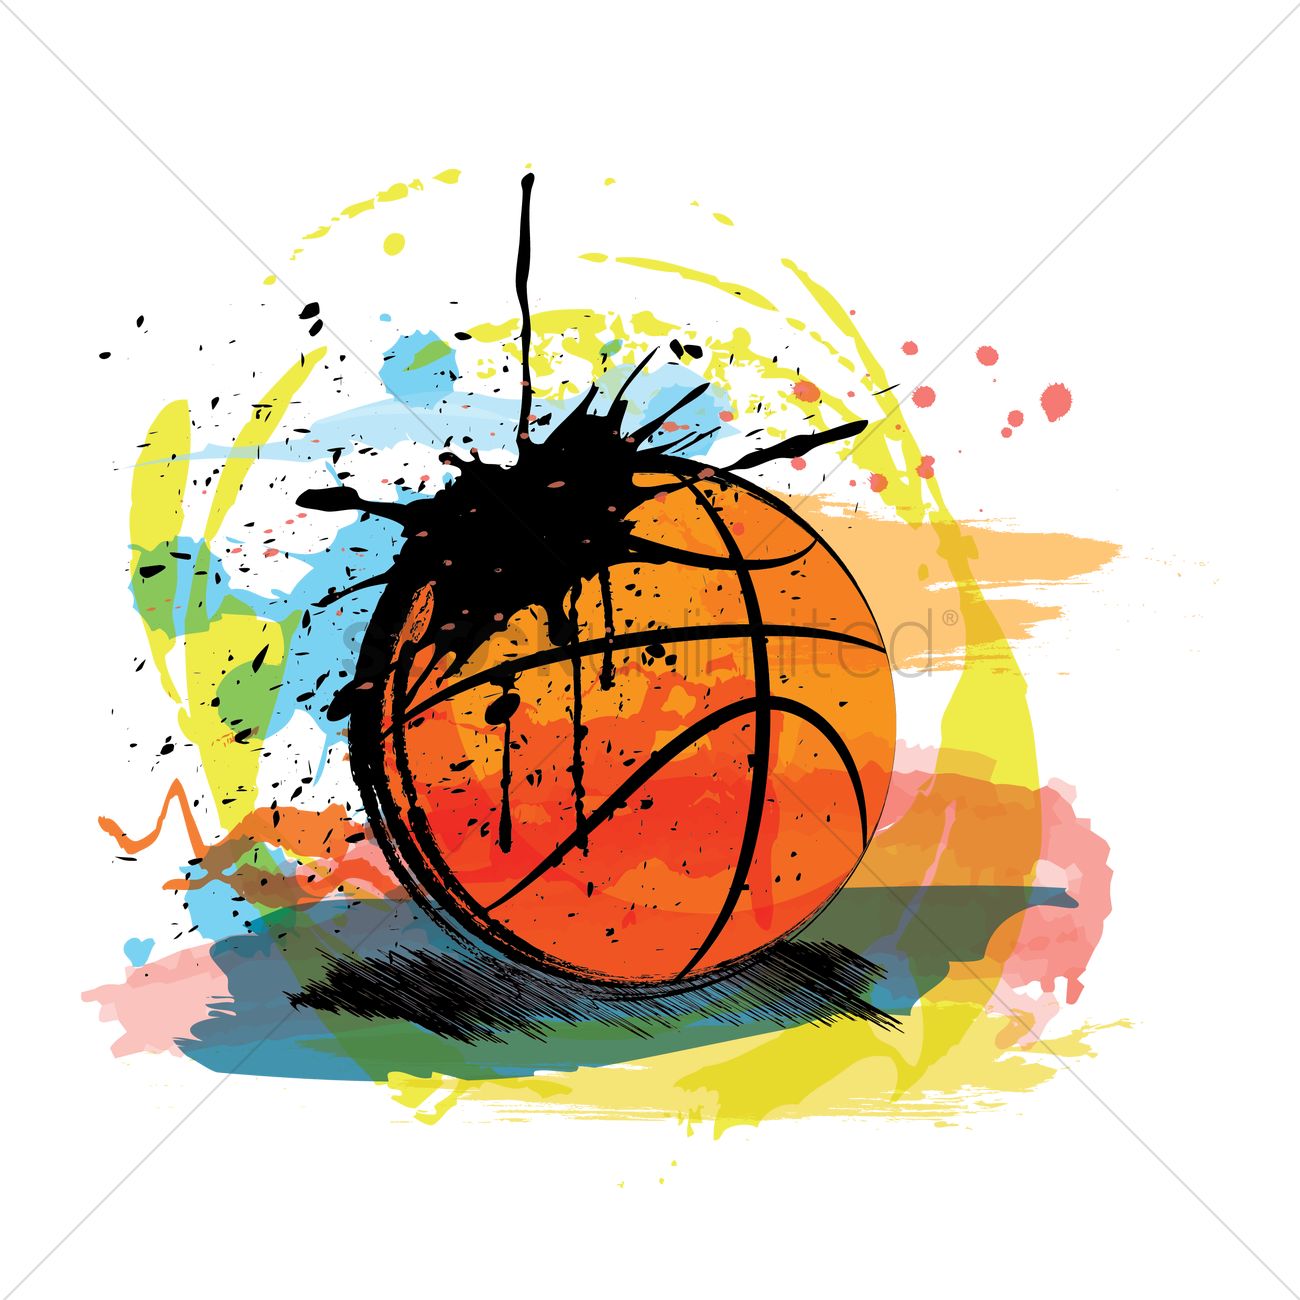 Basketball Abstract cliparts image pack with transparent